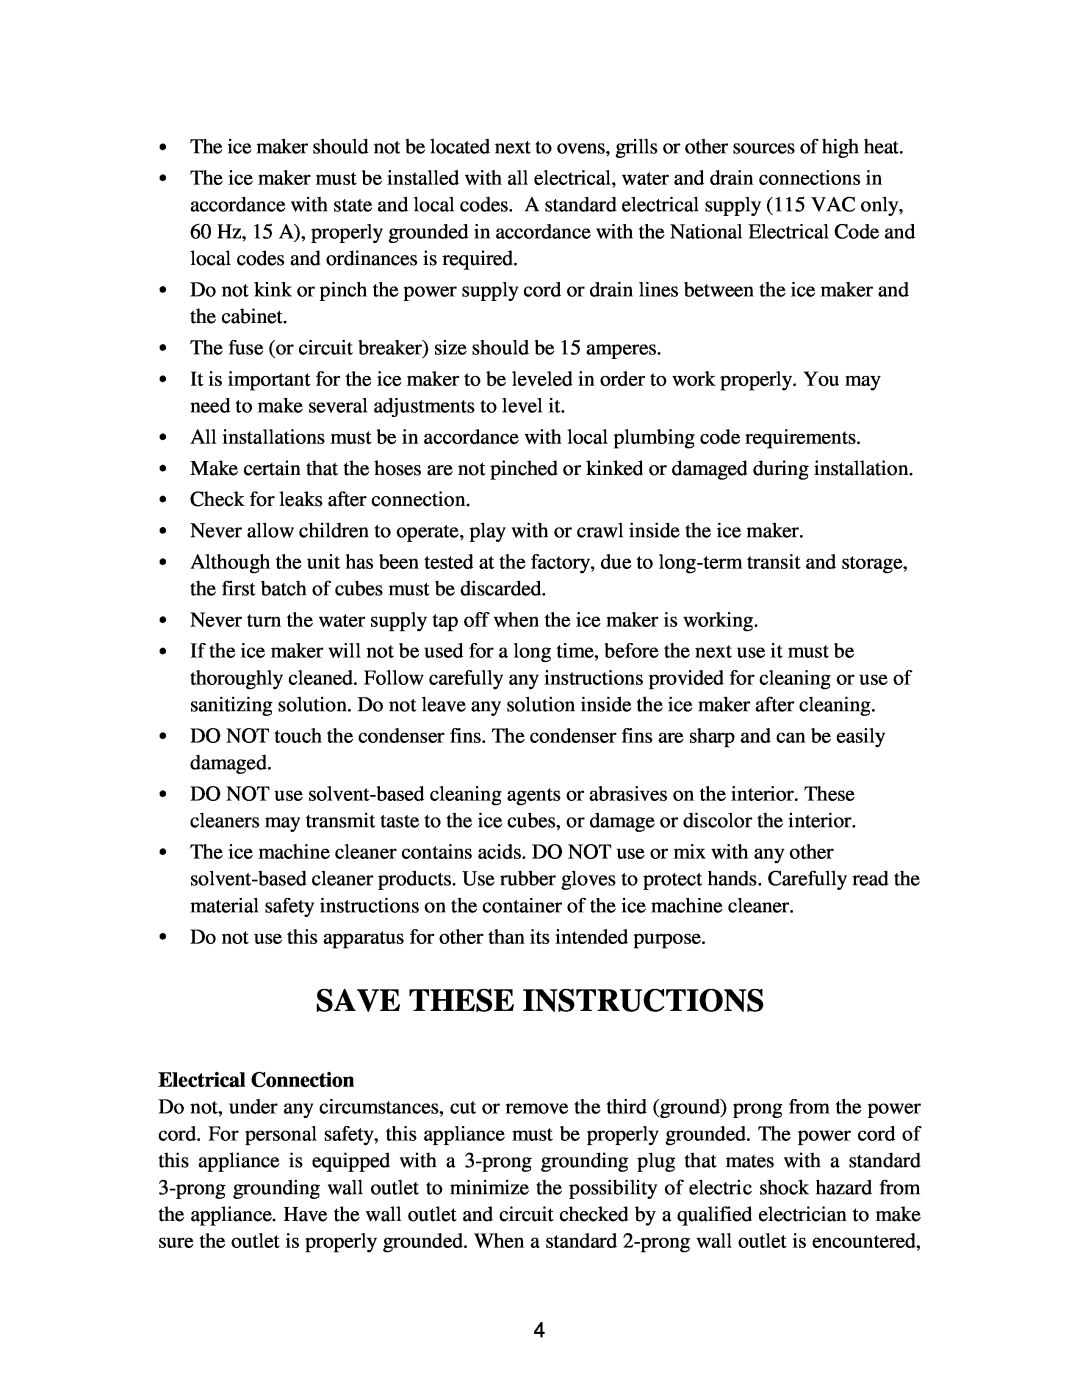 Franklin Industries, L.L.C FIM90, FIM120 user manual Save These Instructions, Electrical Connection 